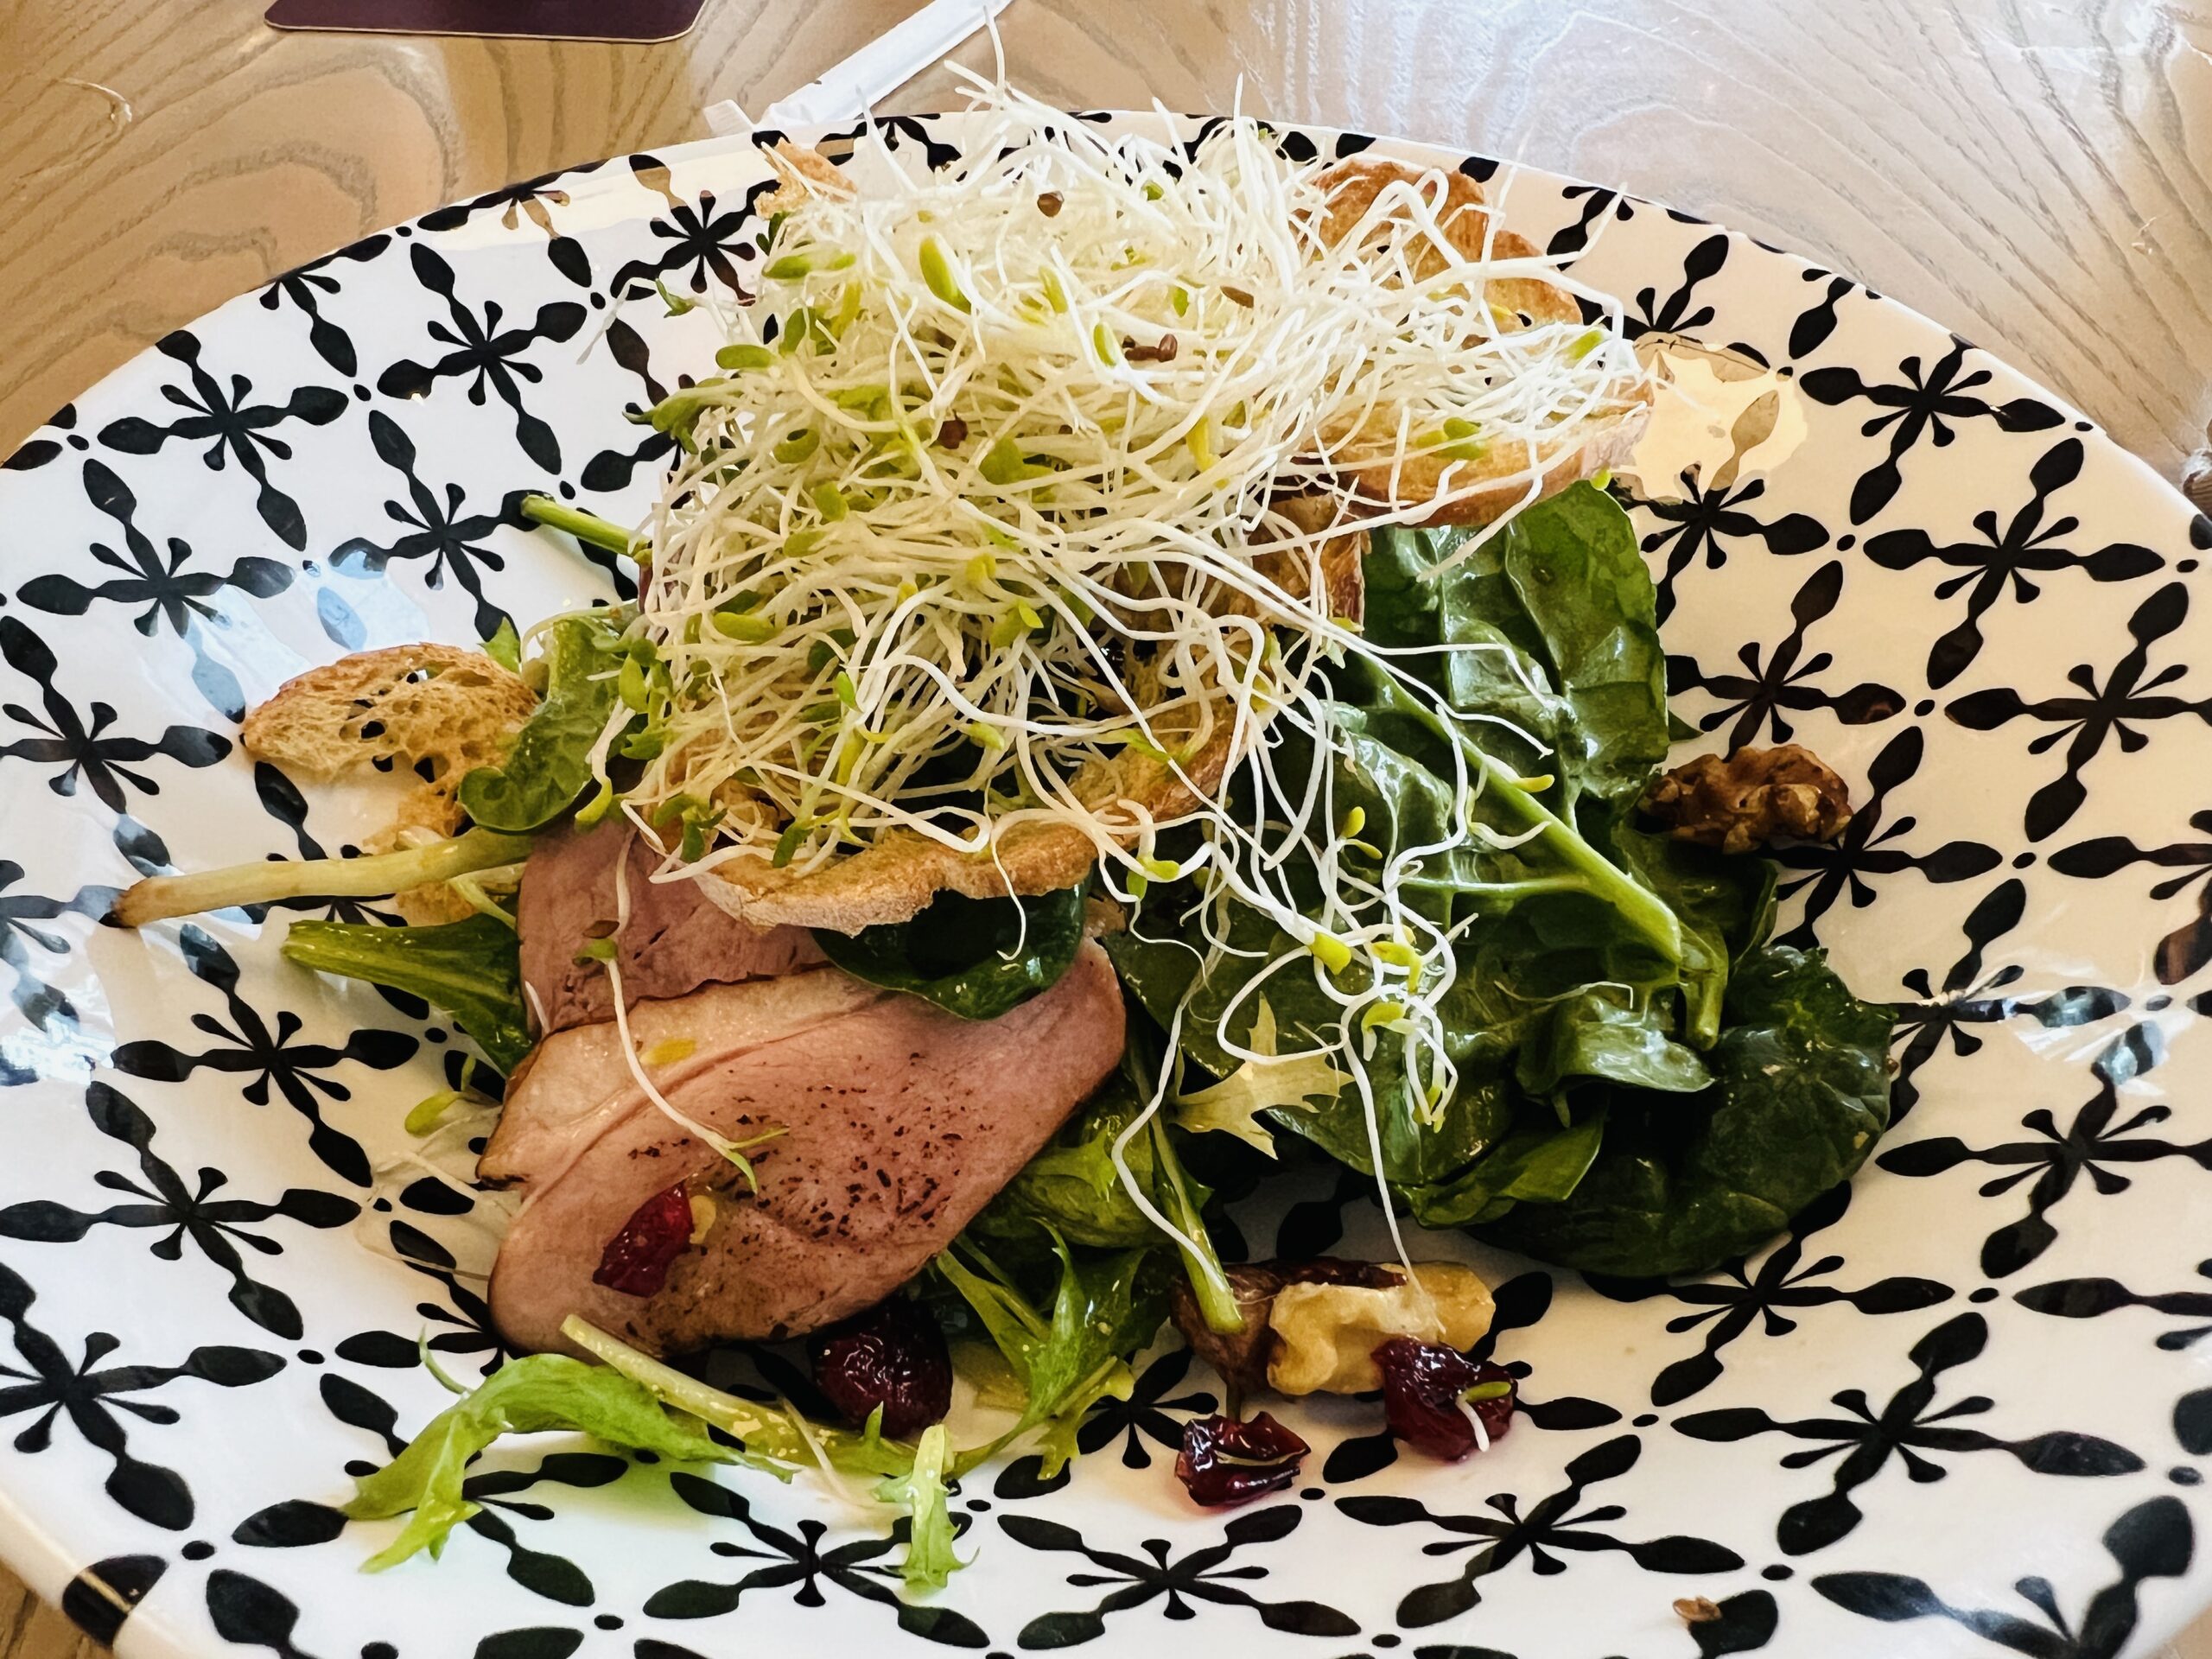 Alley on 25 - Smoked Duck Salad